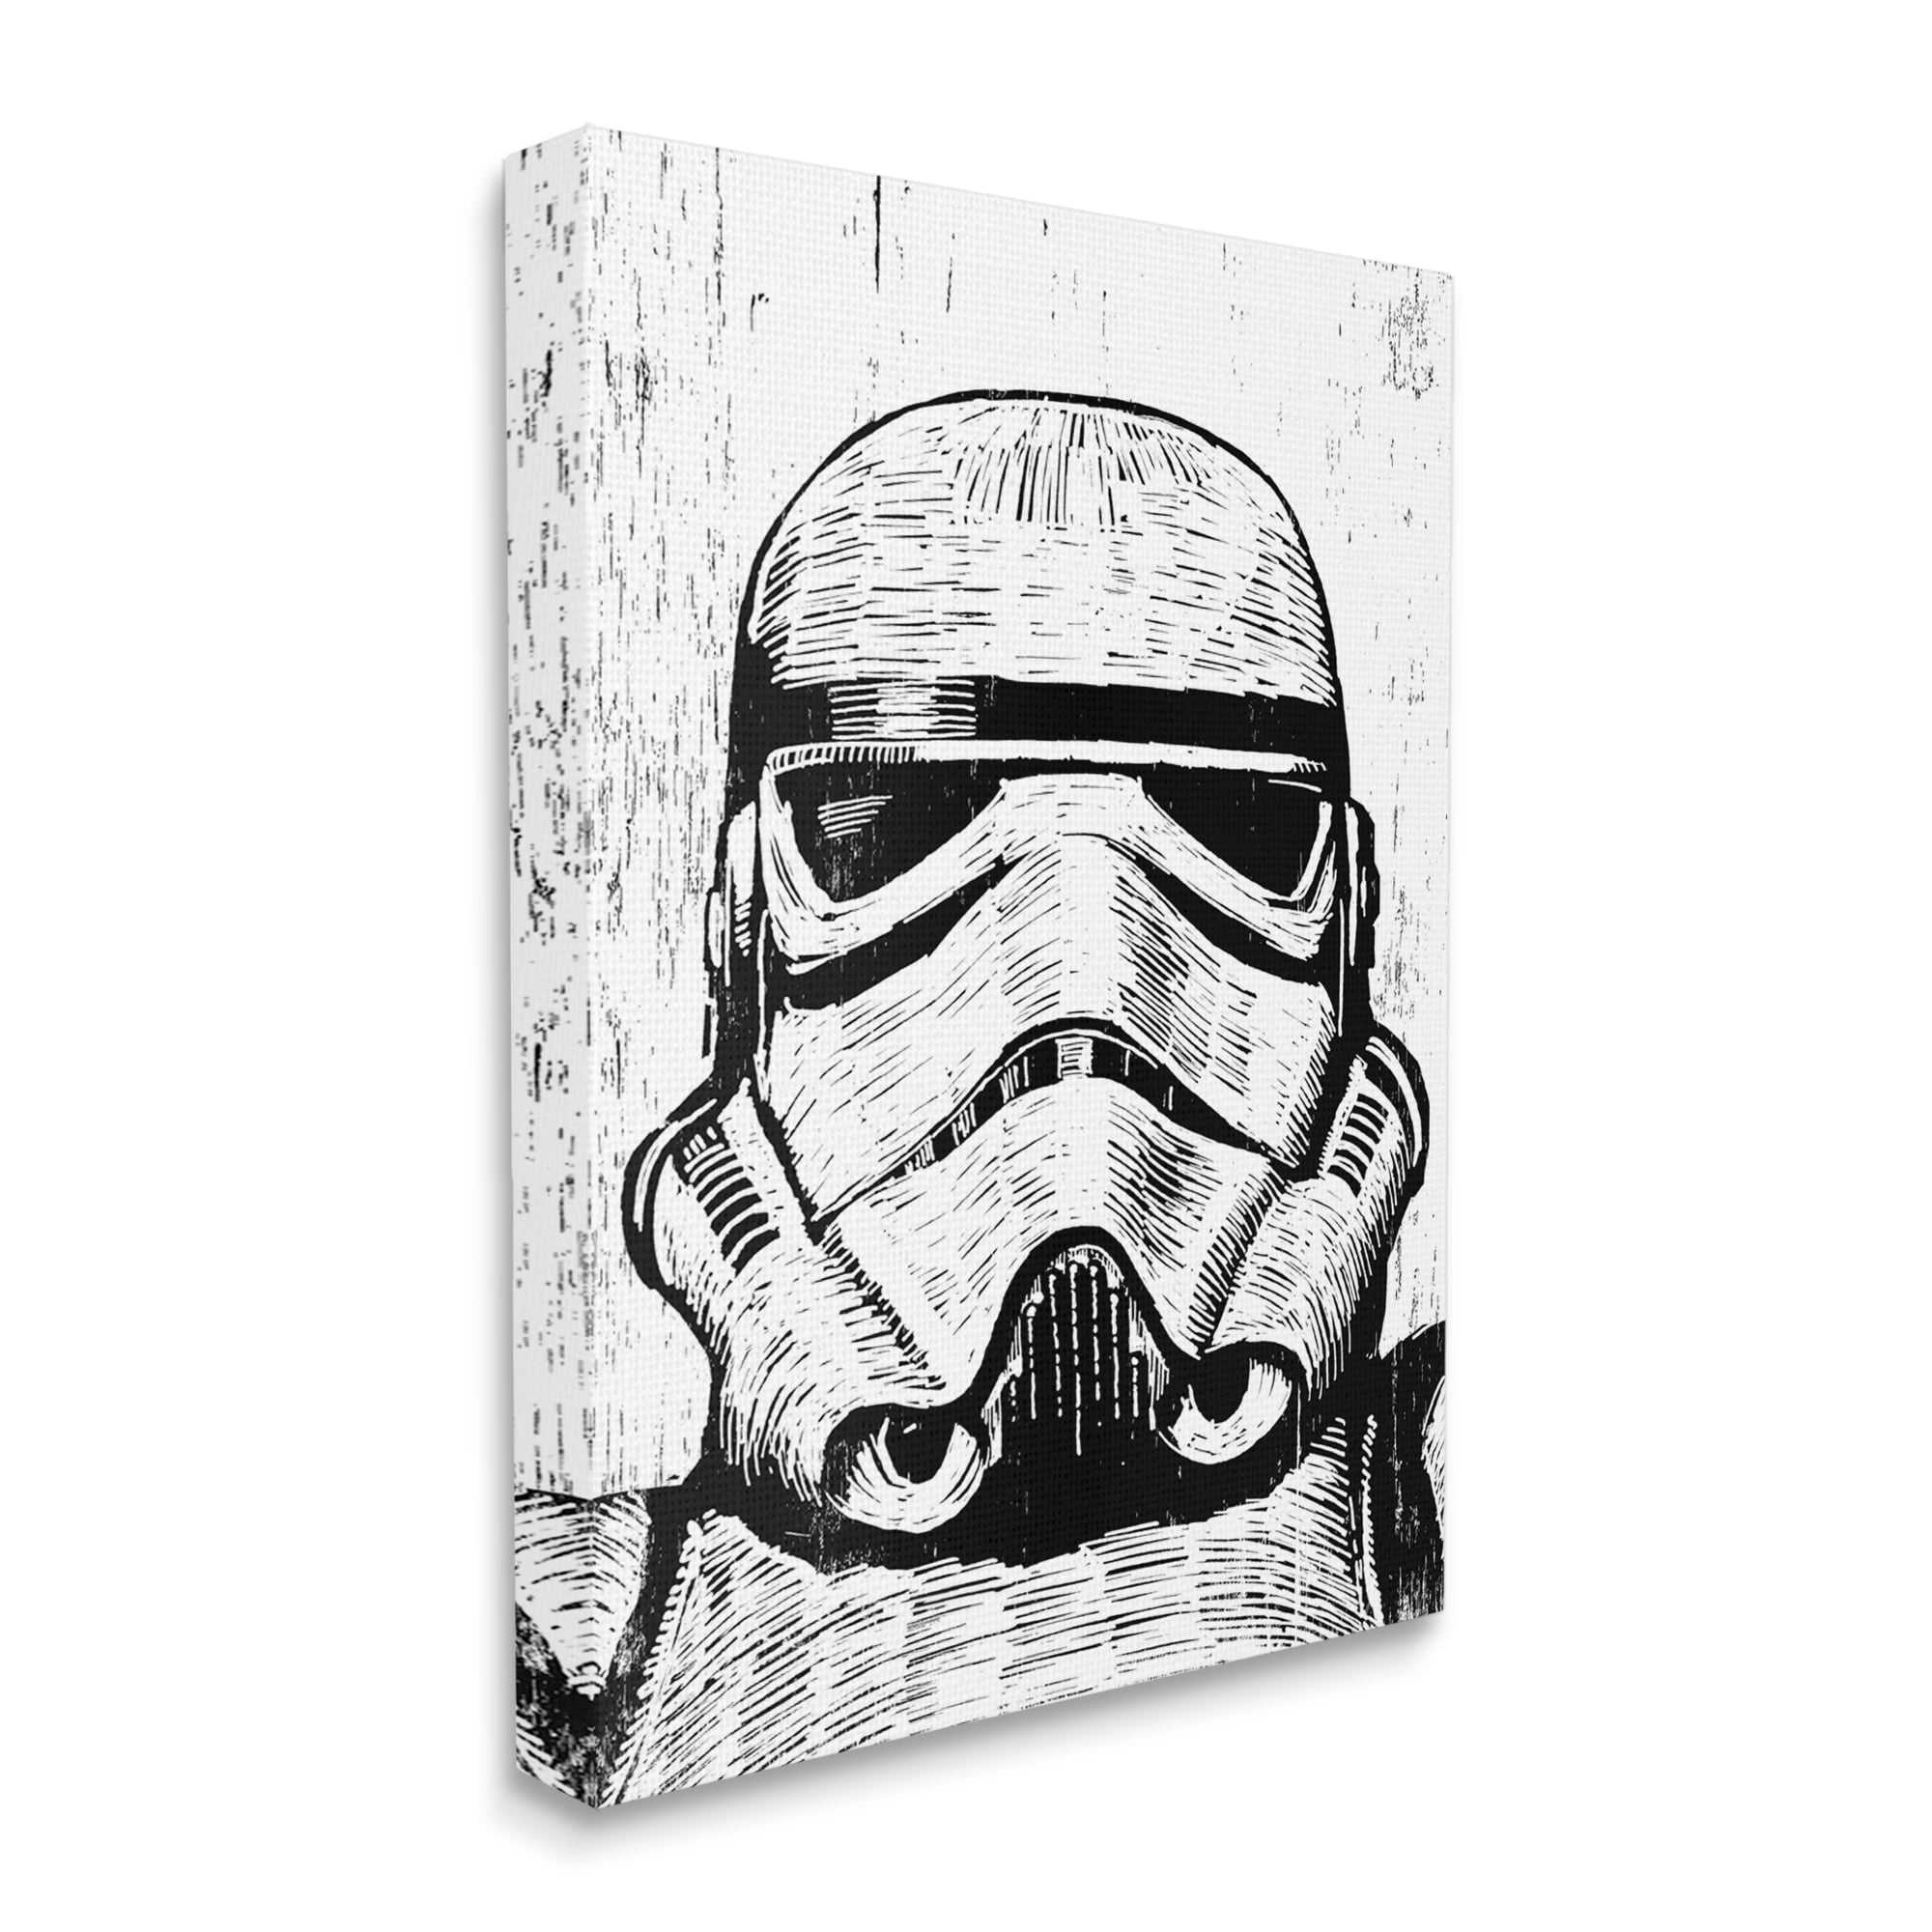 The Stupell Home Decor Collection Black and White Star Wars Stormtrooper Distressed Wood Etching Wall Art Canvas